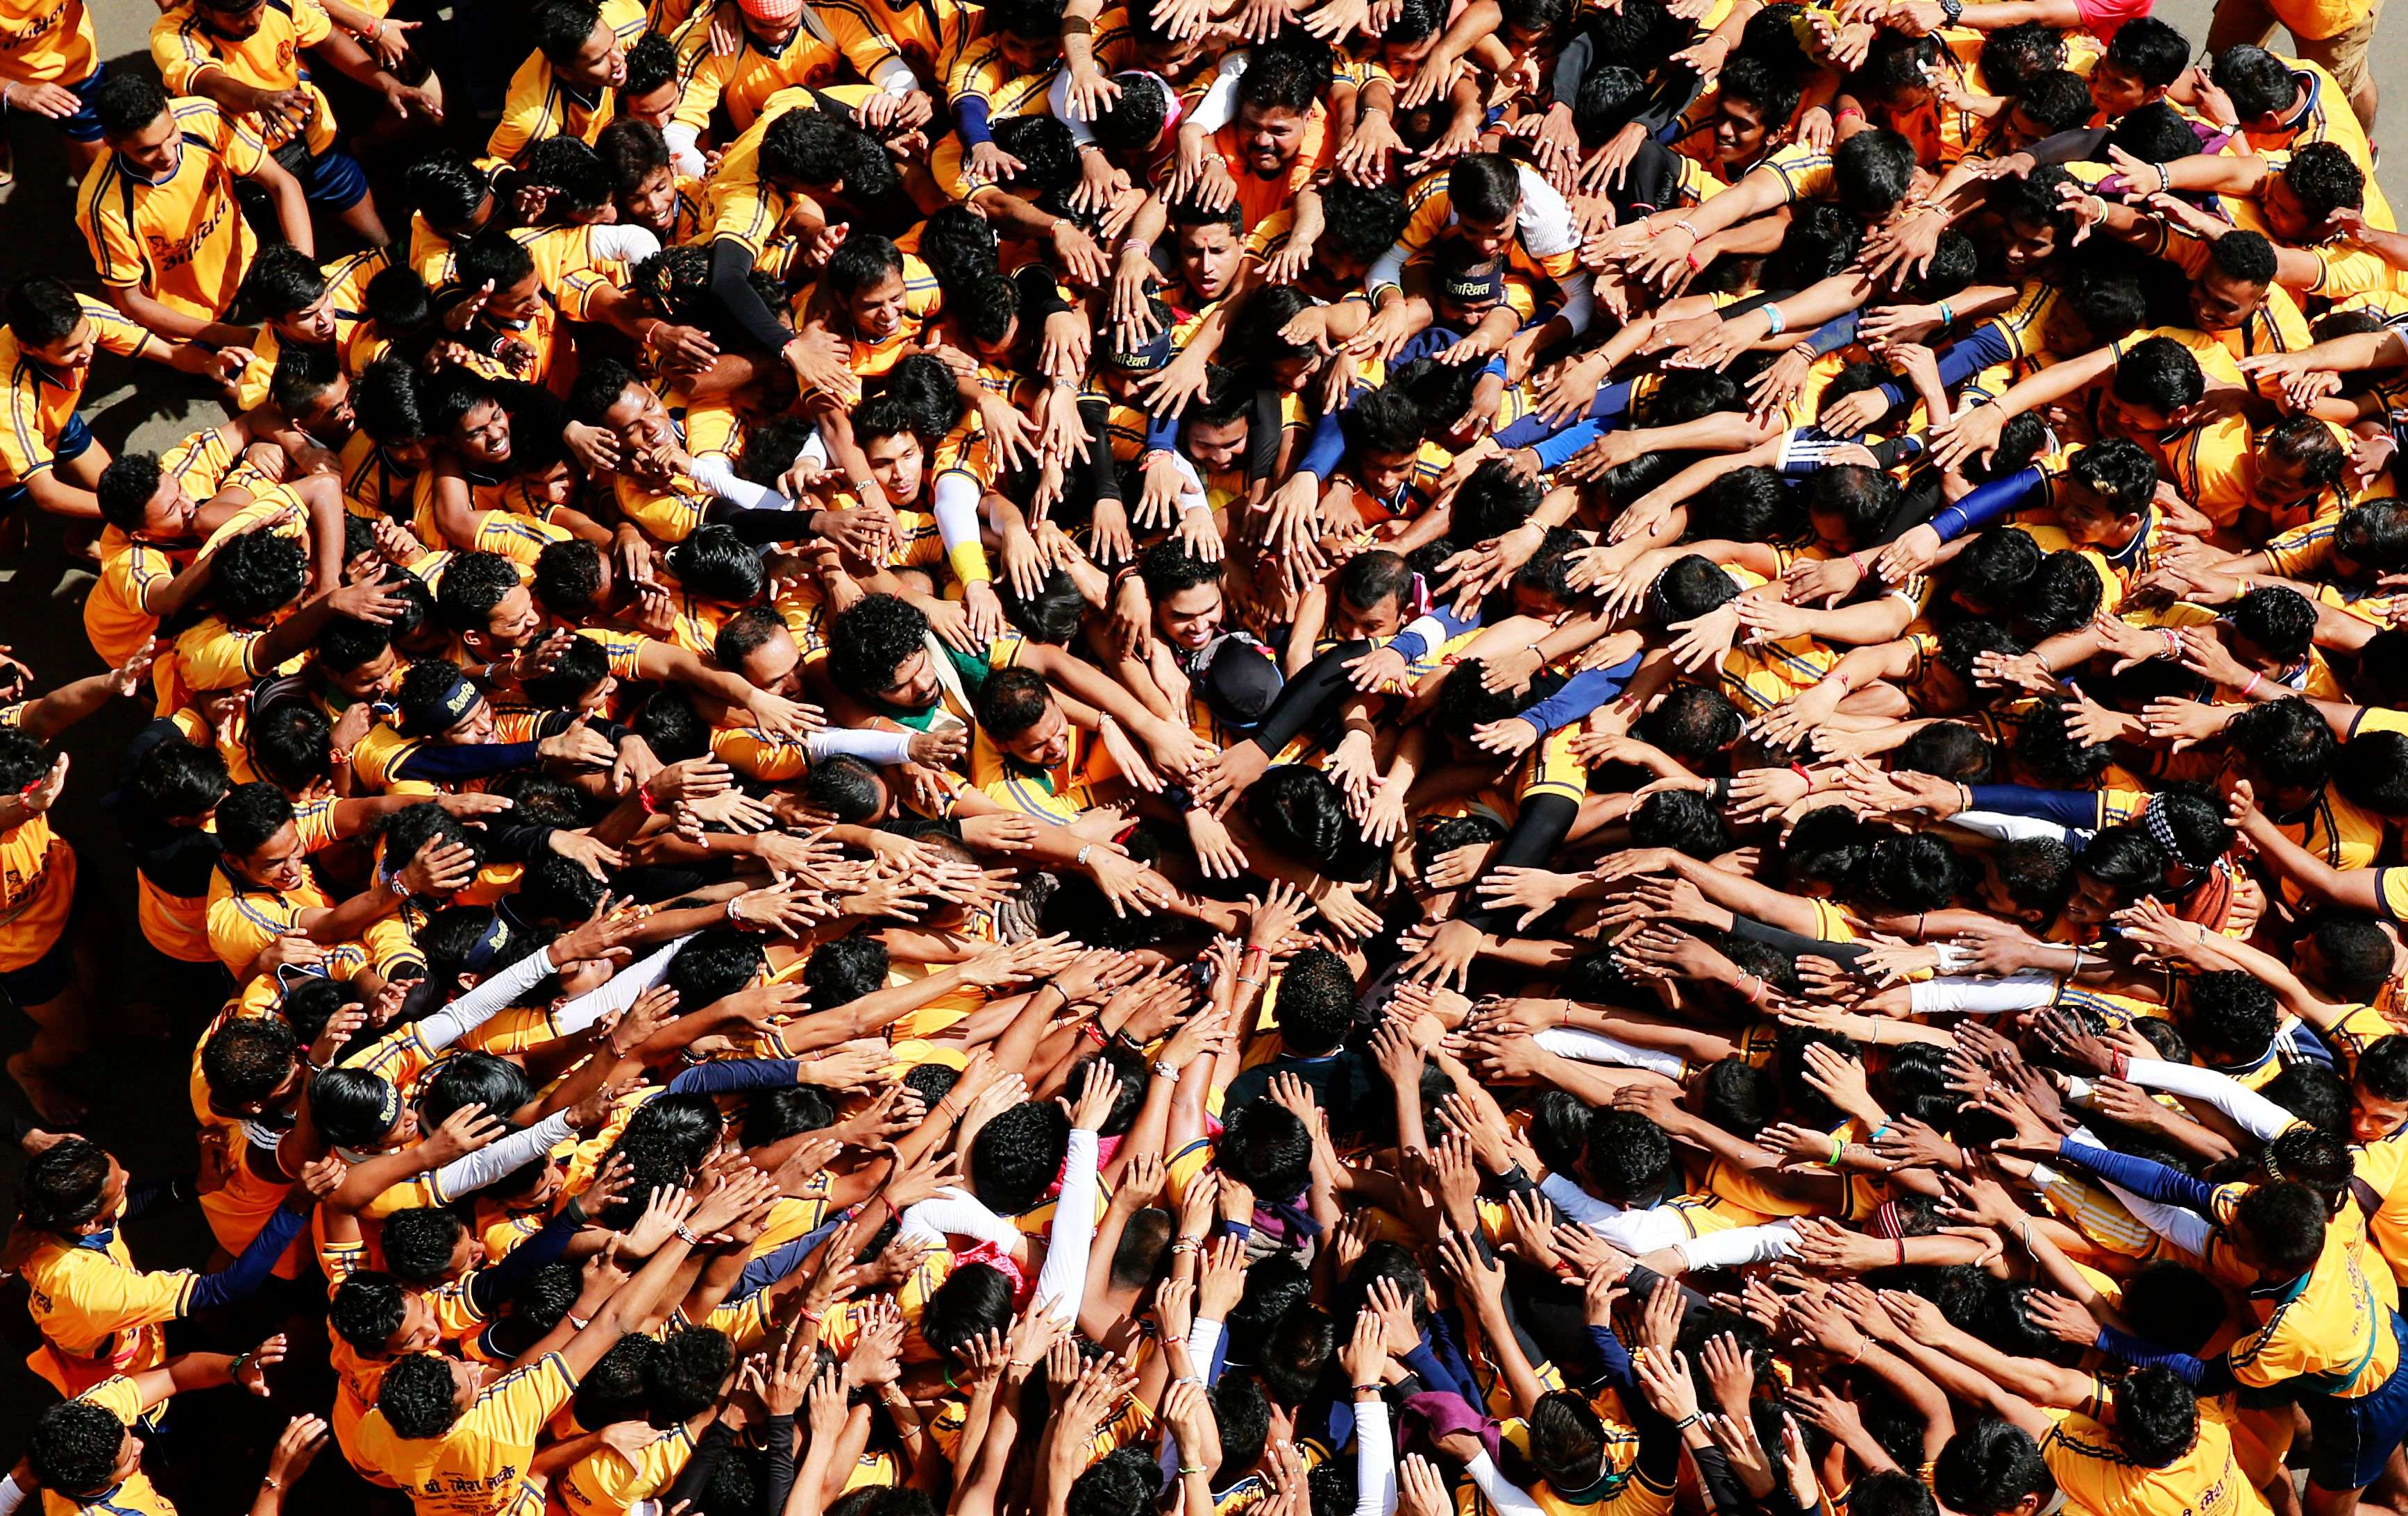 Indian youth form a human pyramid to break the "Dahi handi," an earthen pot filled with curd hanging above, an integral part of celebrations to mark Janmashtami festival in Mumbai, India, Sunday, Sept 6. 2015. The festival marks the birth of Hindu god Krishna and the act seeks to reenact the story of Lord Krishna stealing butter during his childhood.(AP Photo/Rafiq Maqbool)